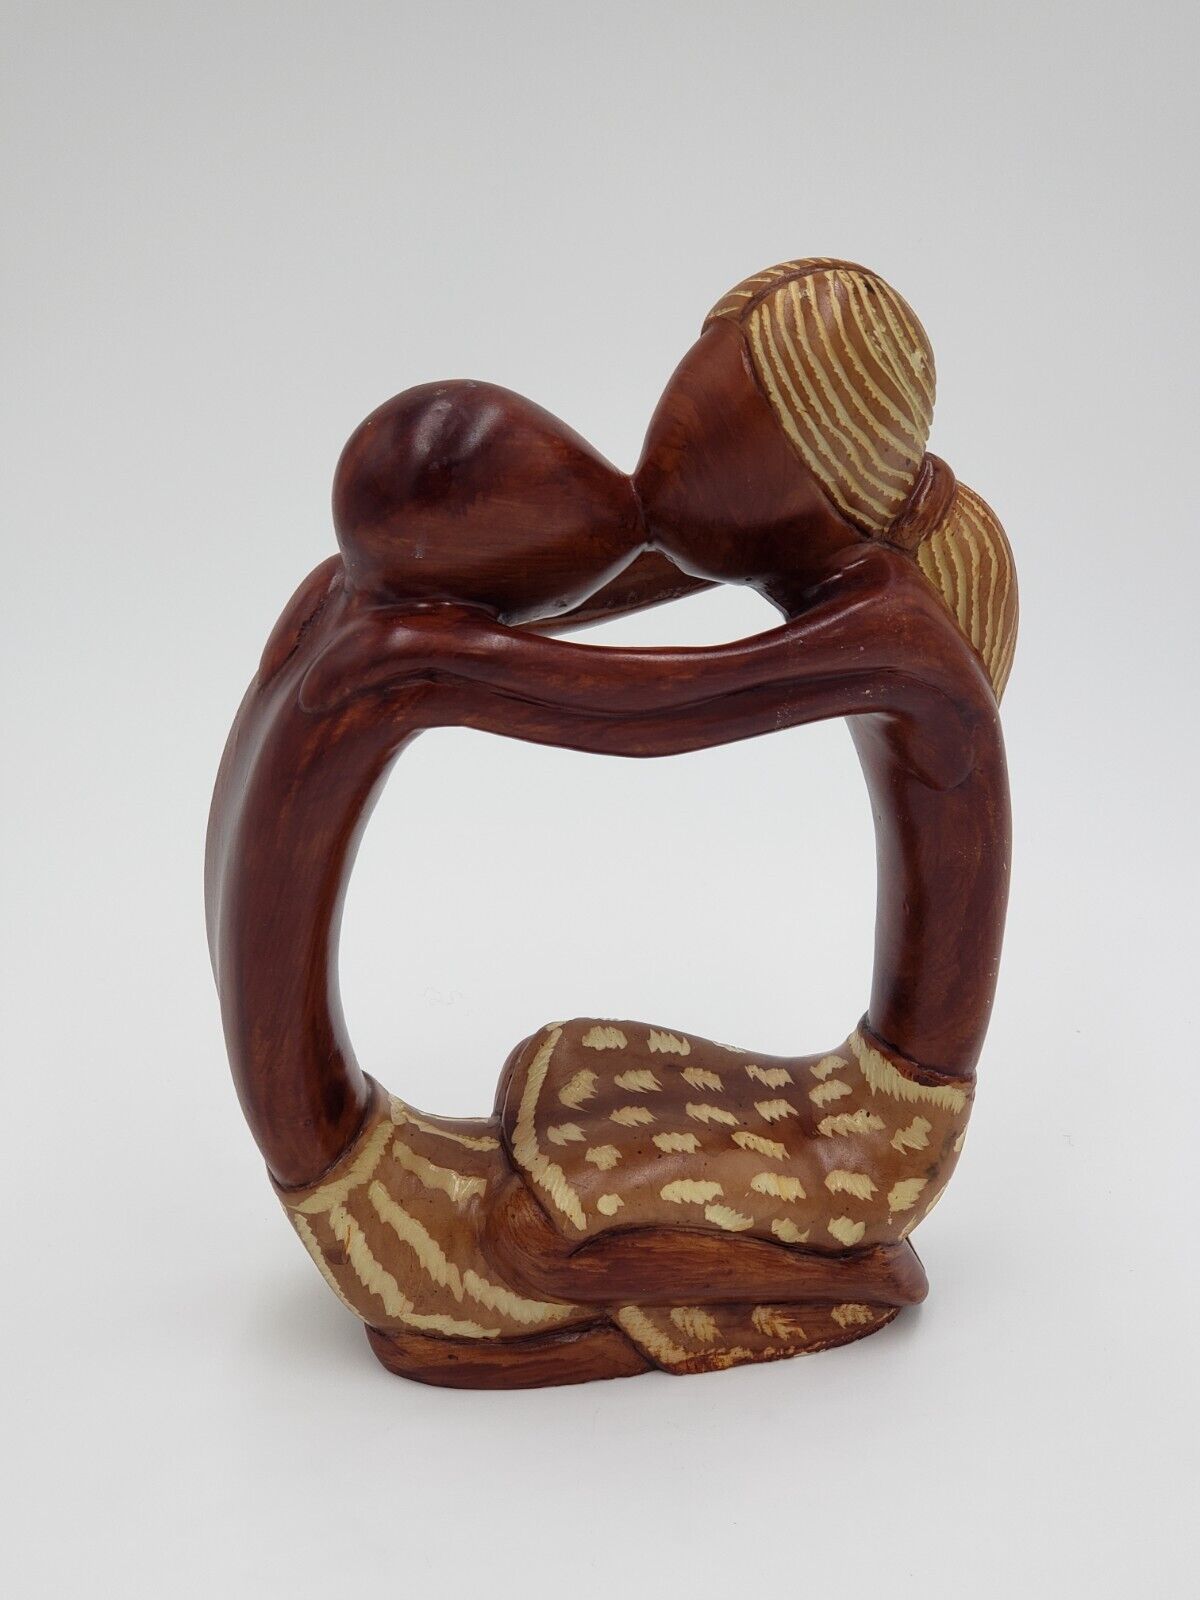 Abstract Stylized Sculpture of Two Lovers Kissing